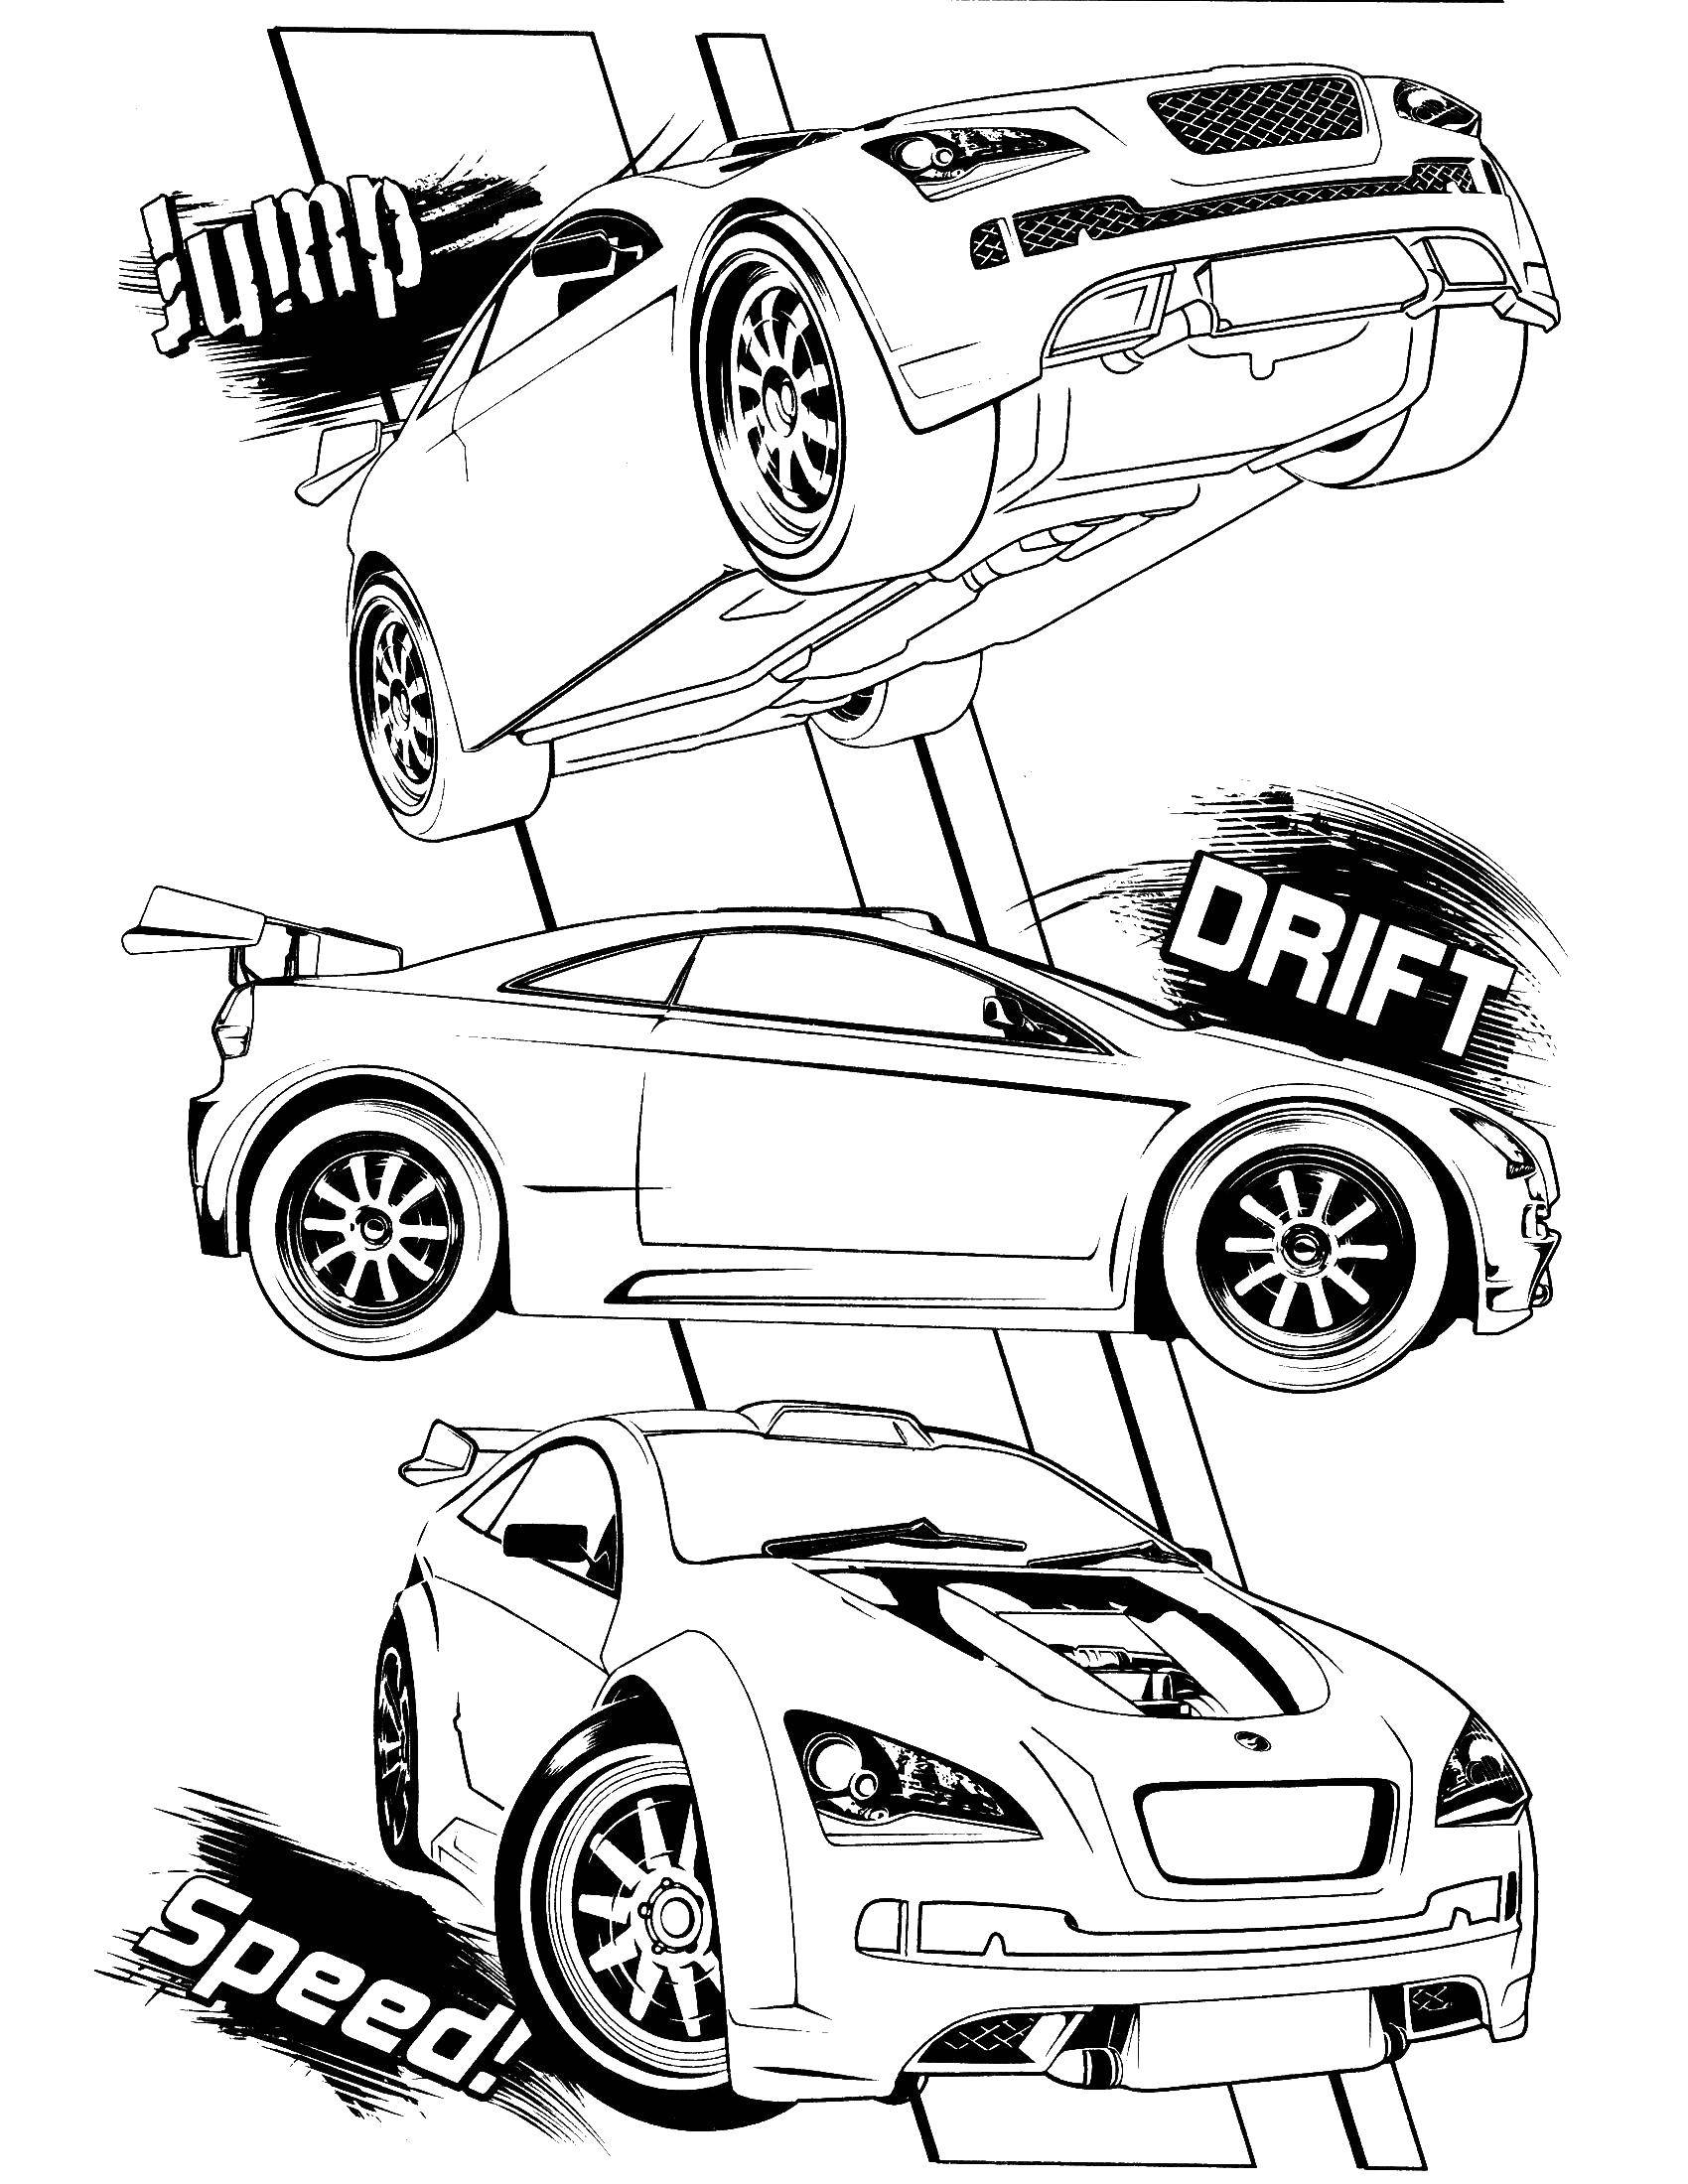 Coloring Cars and drift. Category coloring. Tags:  car, drift, speed, jump.